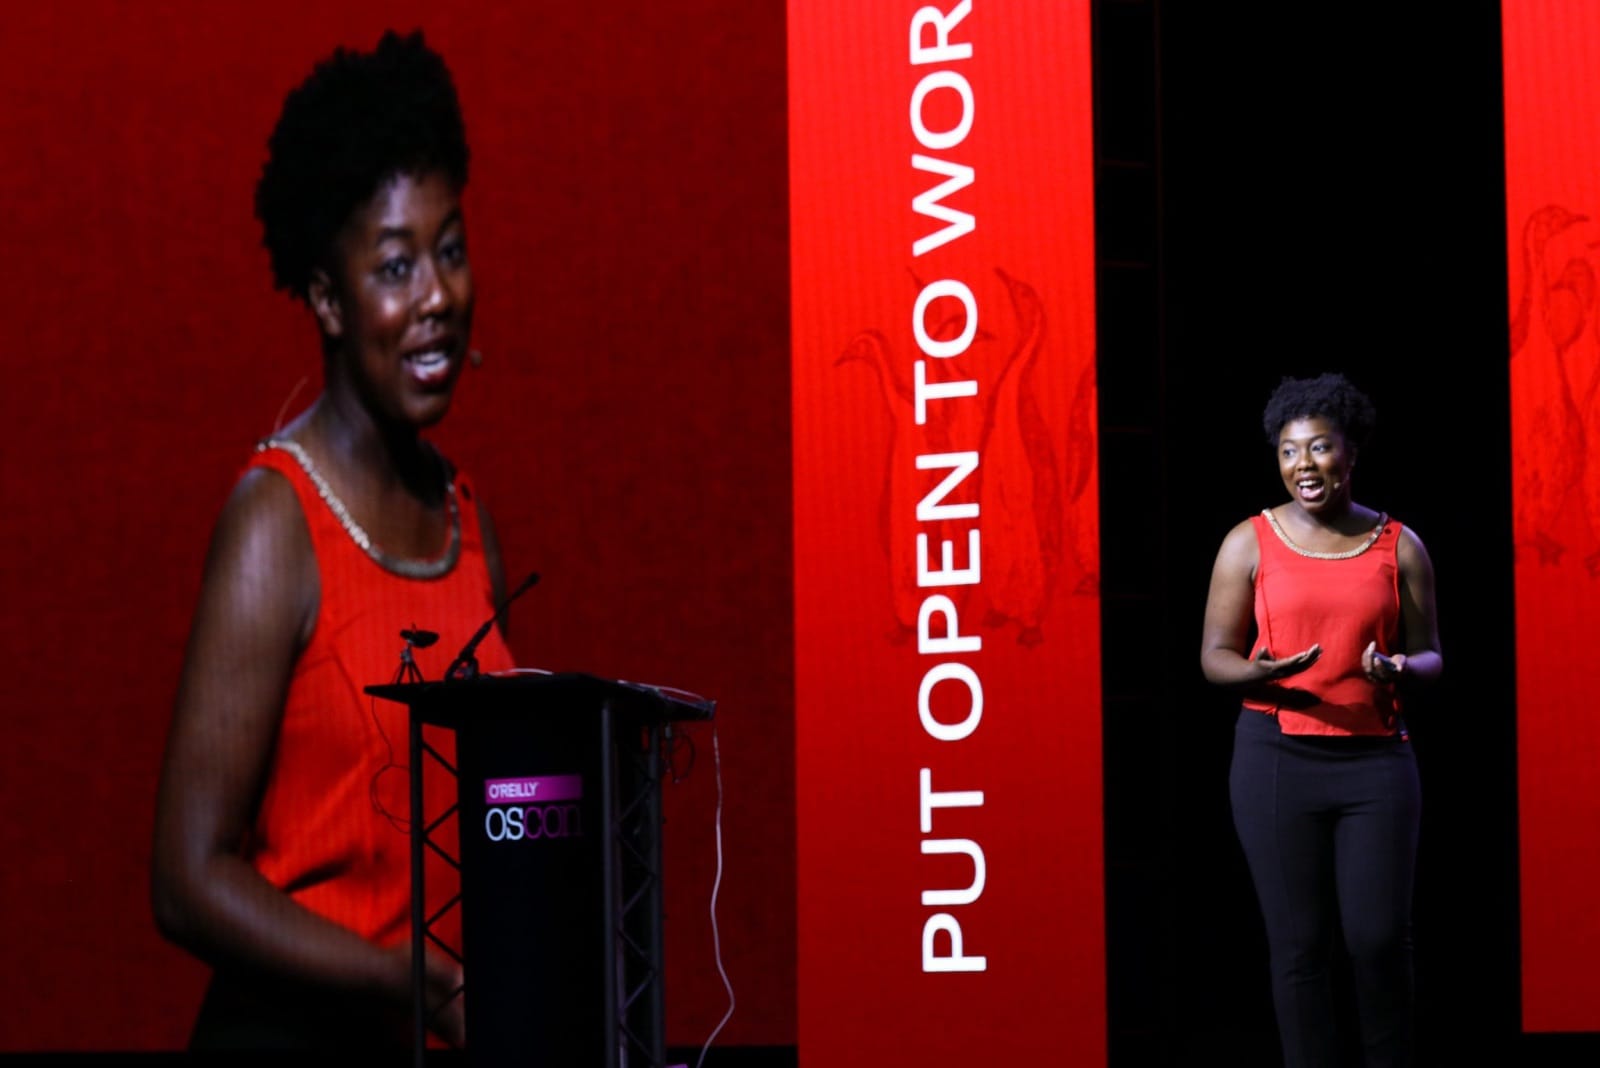 A woman with dark hair and dark skin, wearing a red top, standing on a stage near a podium